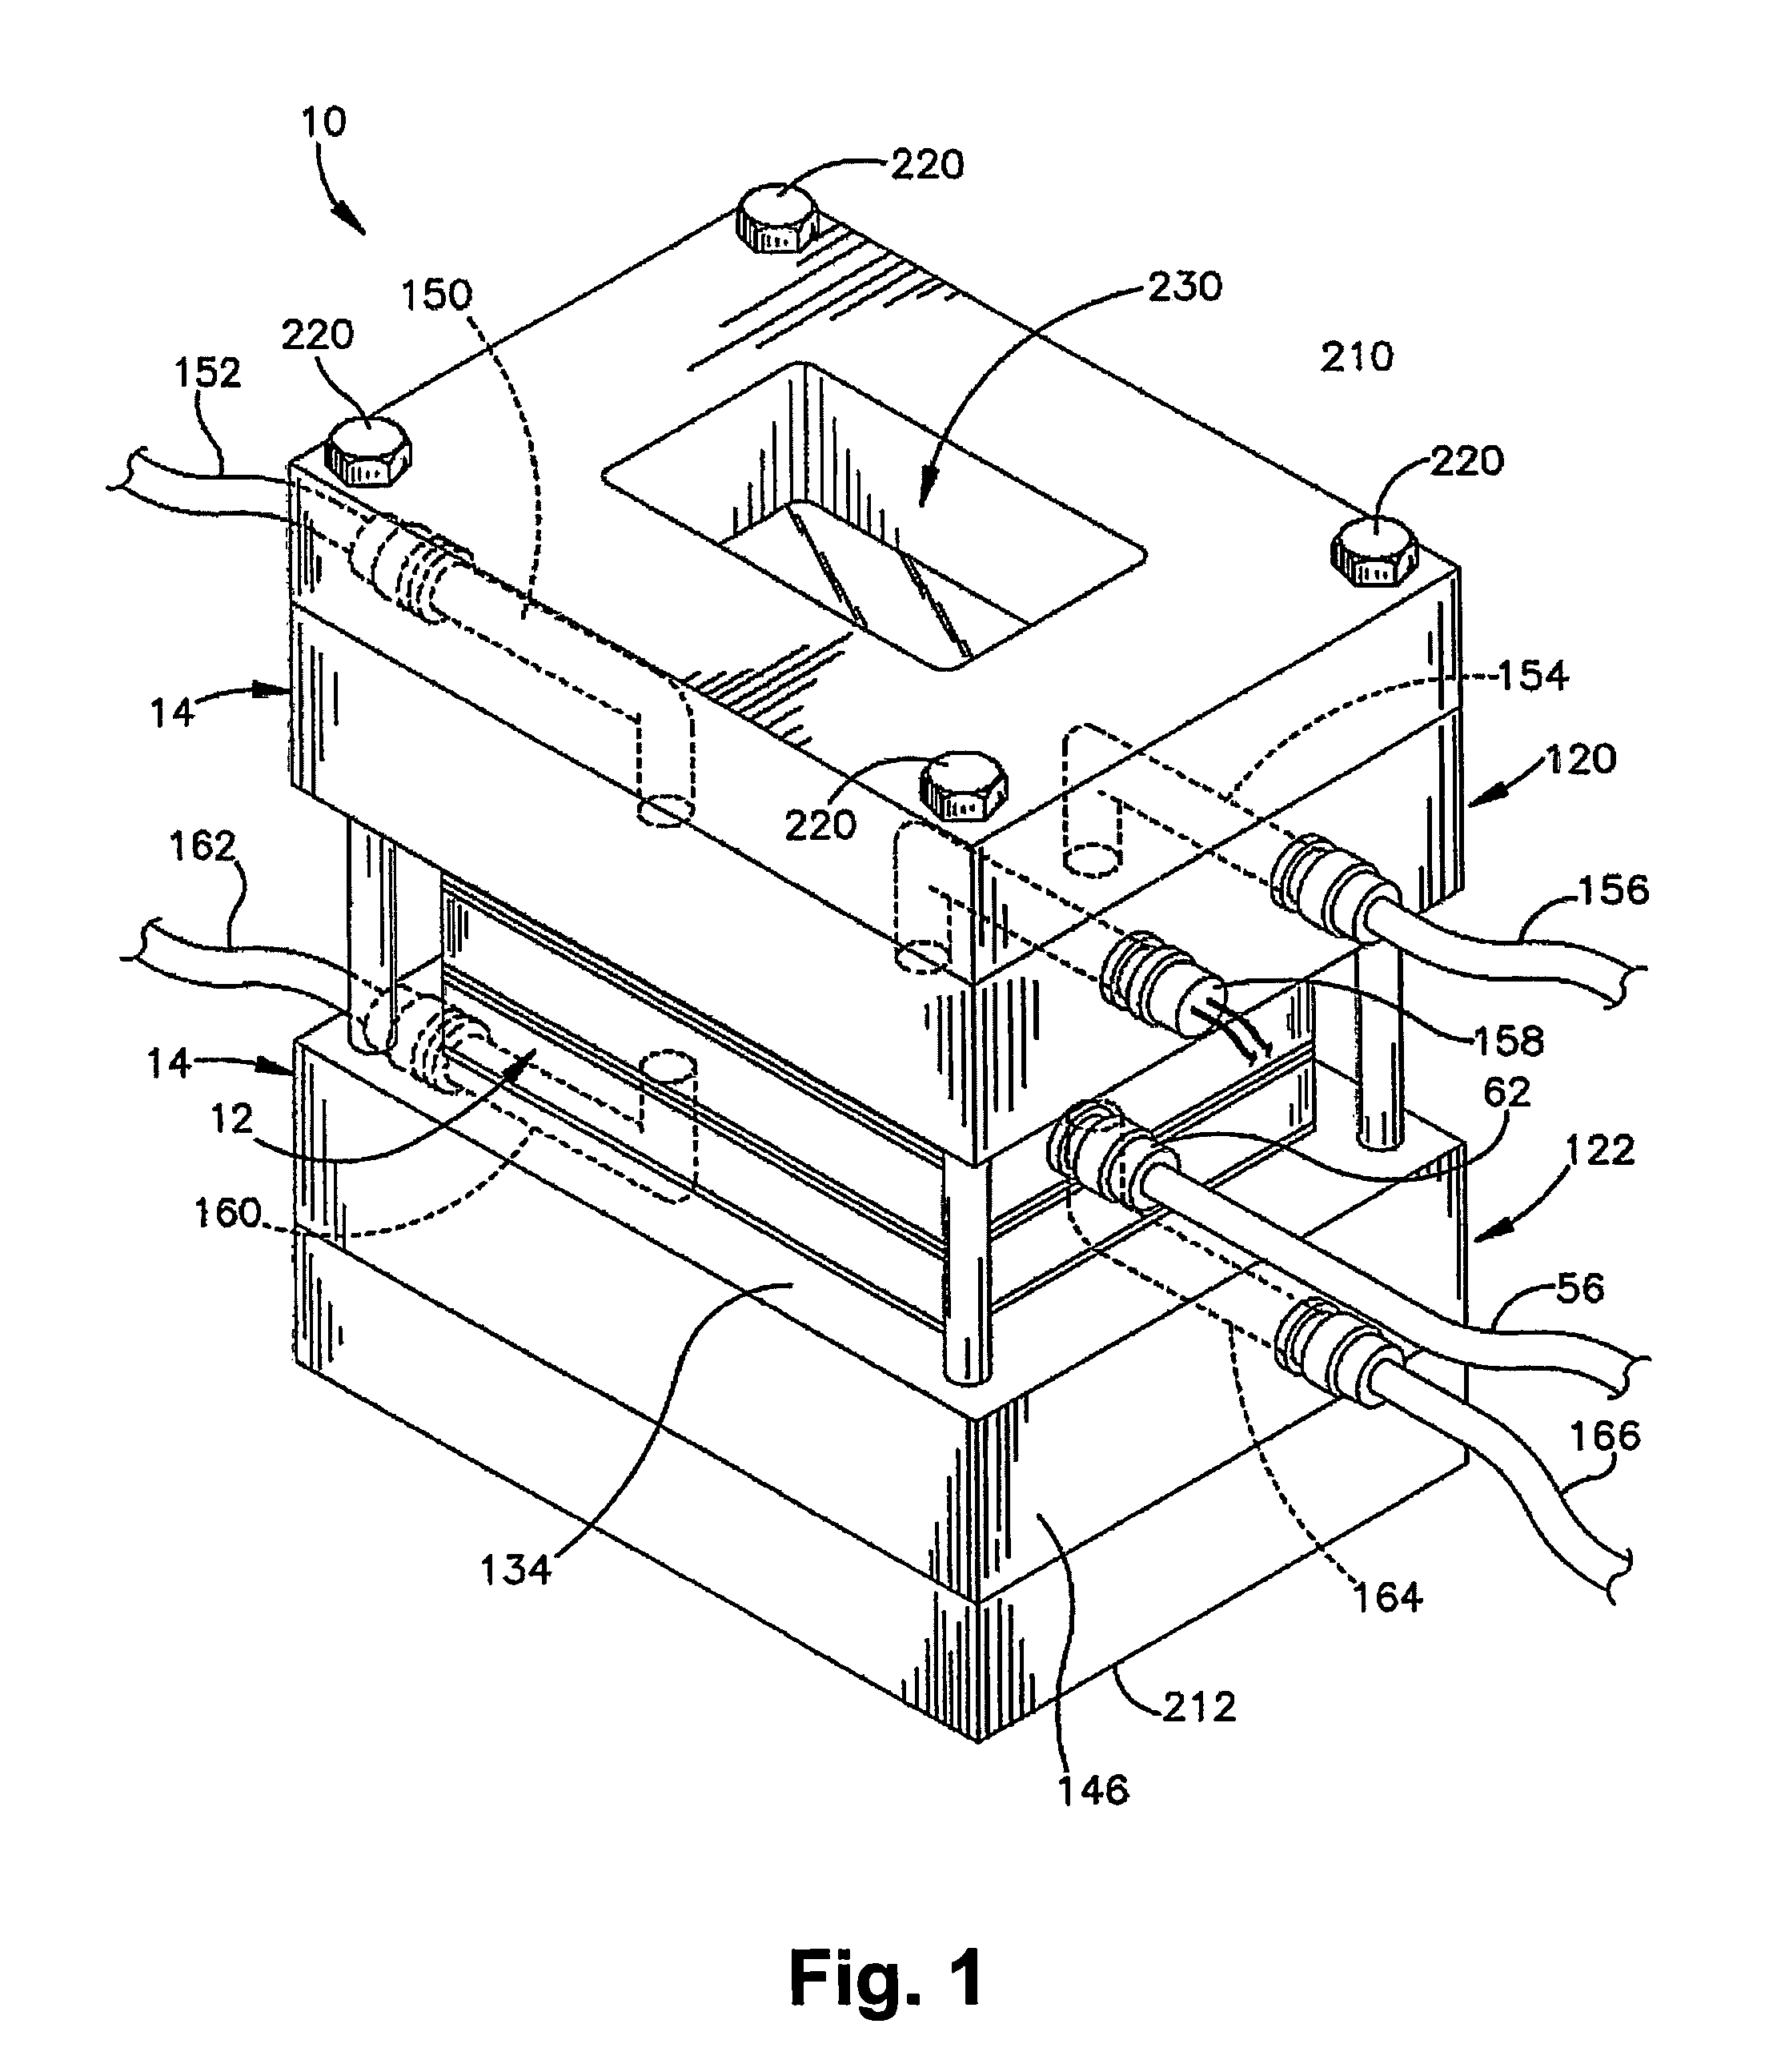 Apparatus and method for tissue engineering